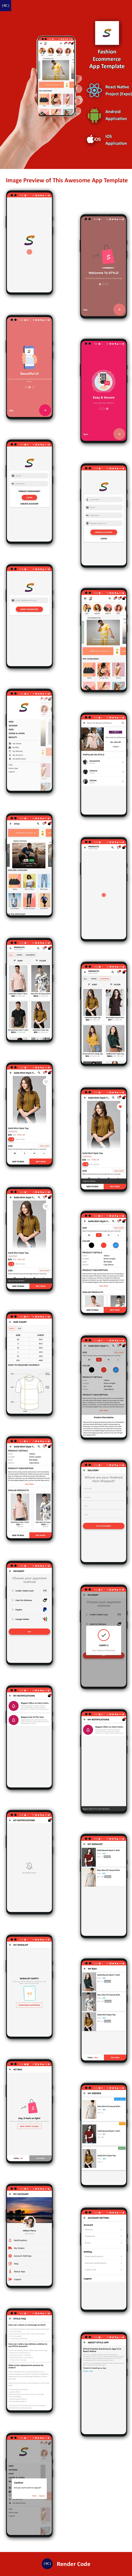 Fashion Ecommerce Android App + Fashion Ecommerce iOS App Template | React Native | Stylo - 4